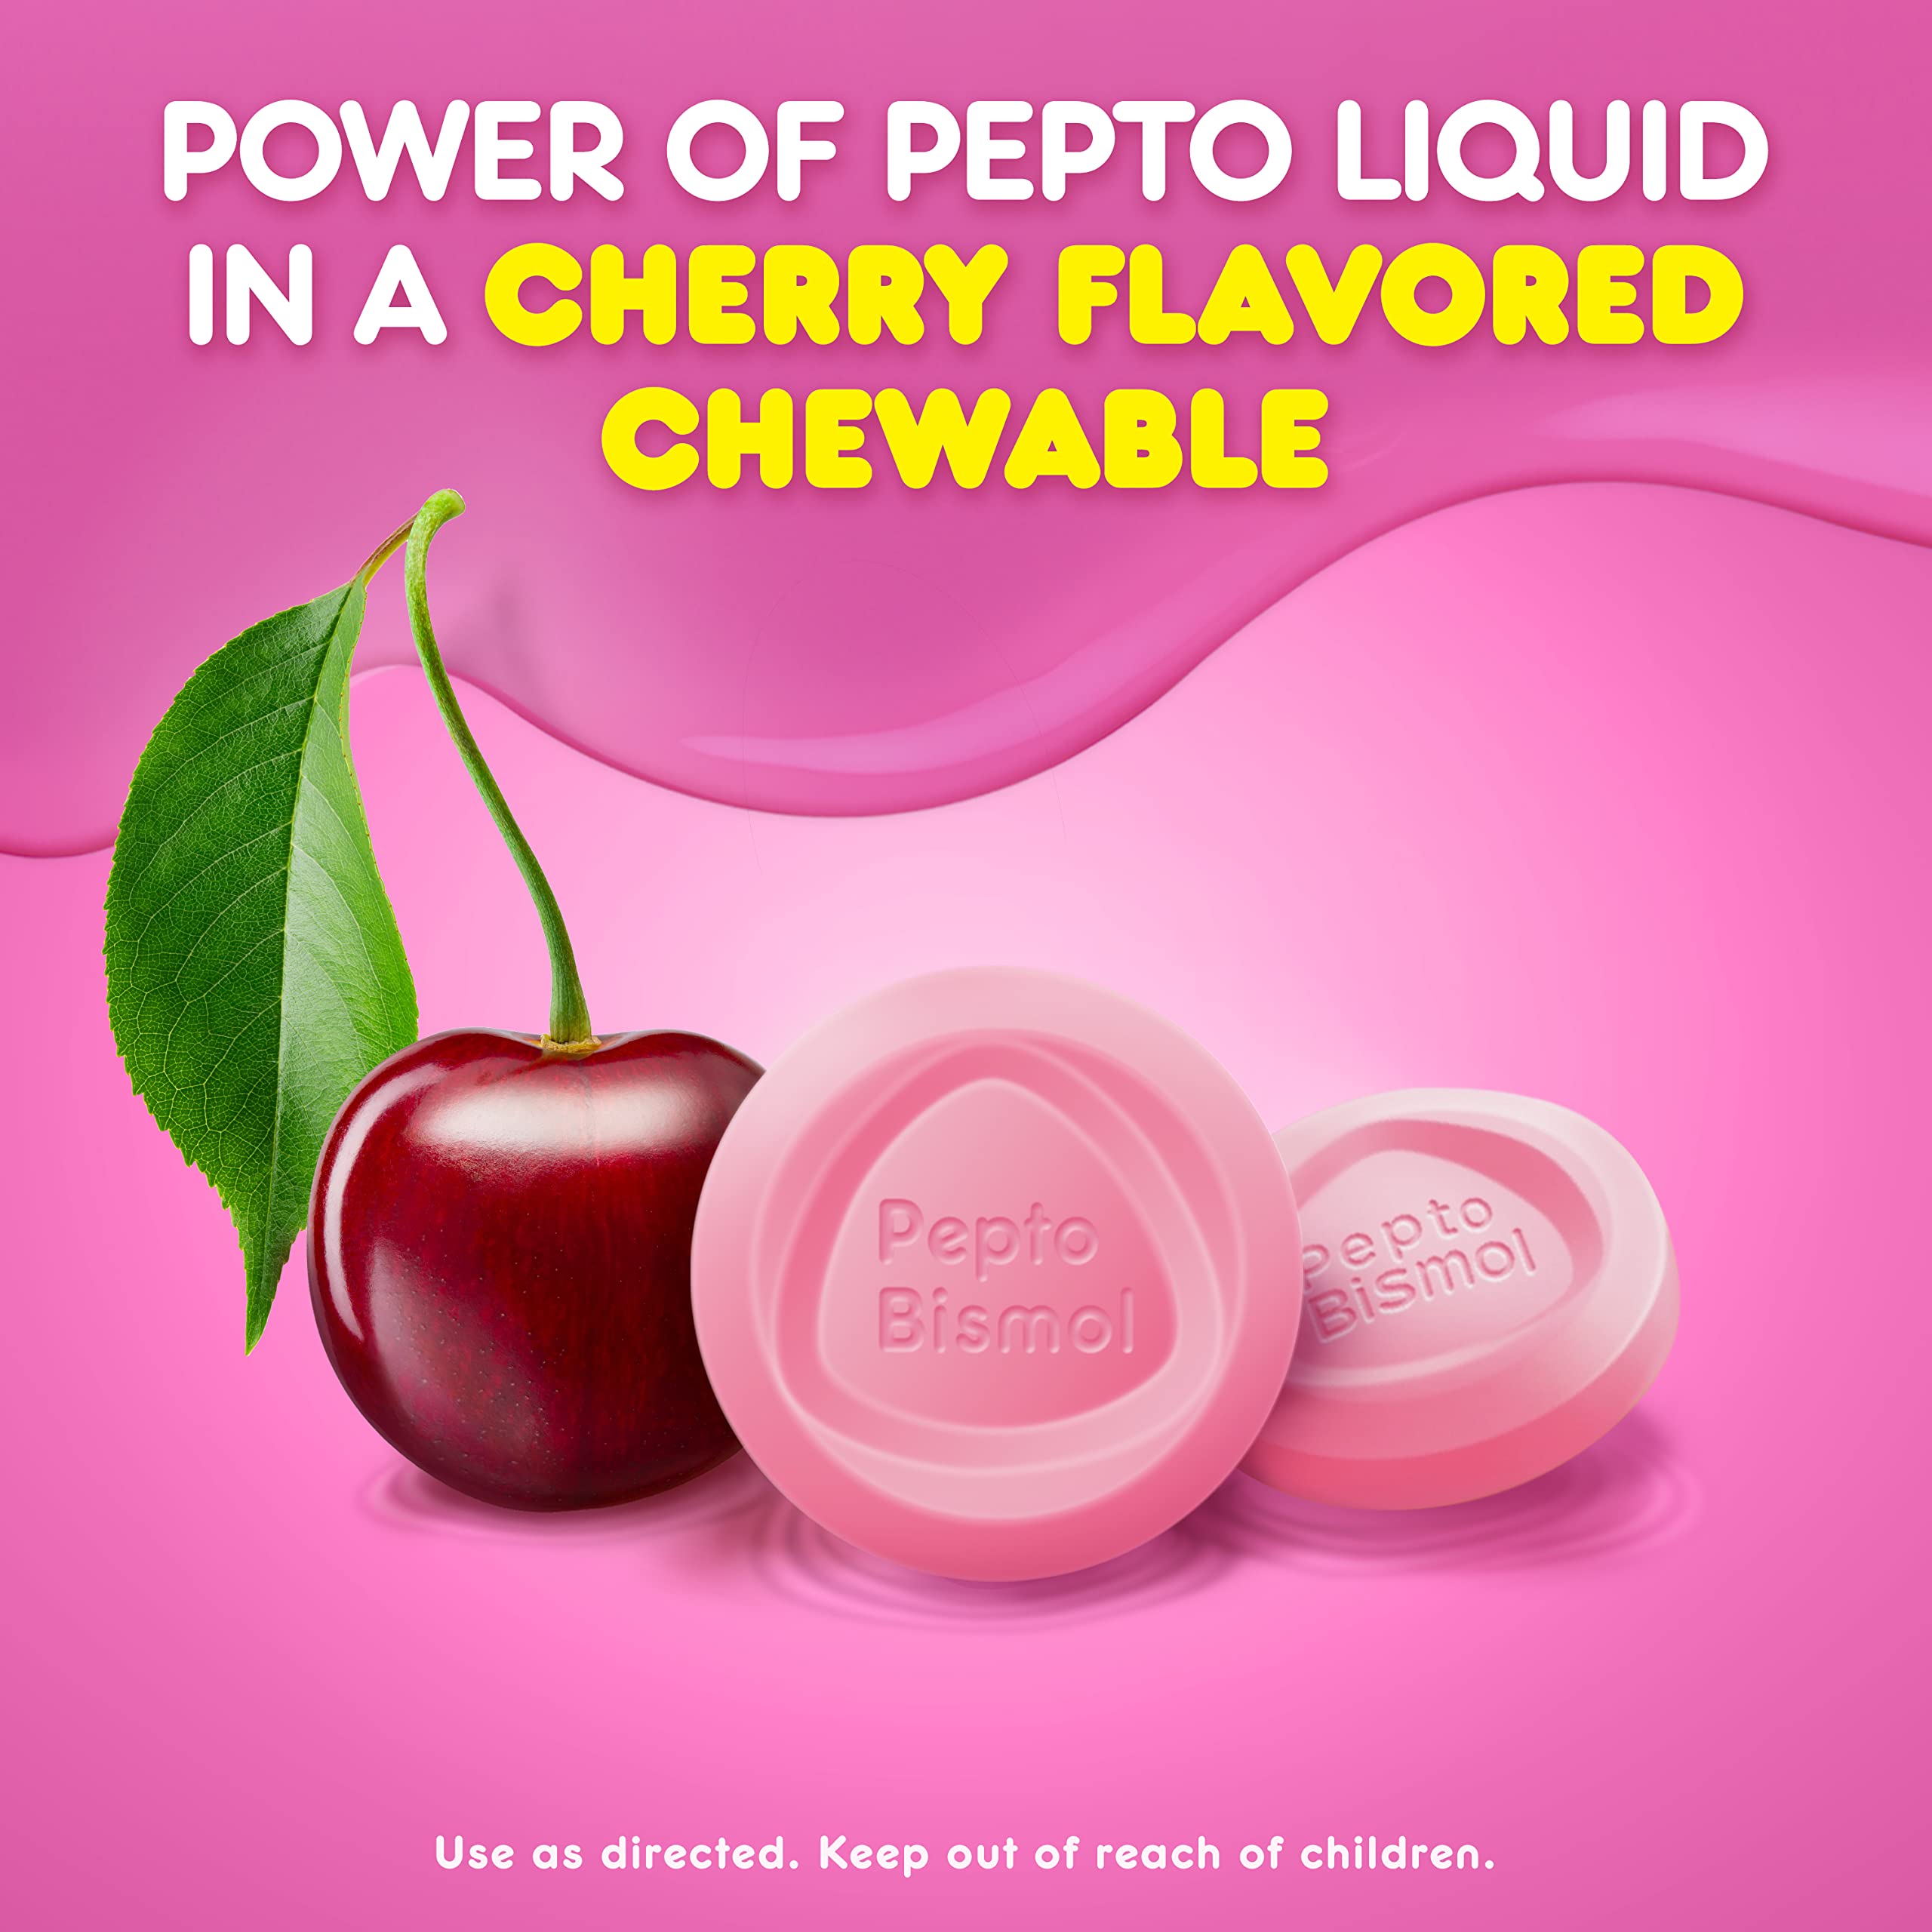 Pepto Bismol Chewables, Upset Stomach Relief, Bismuth Subsalicylate, Multi-Sympton Relief of Gas, Nausea, Heartburn, Indigestion, Diarrhea, Cherry Flavor, 30 Tablets